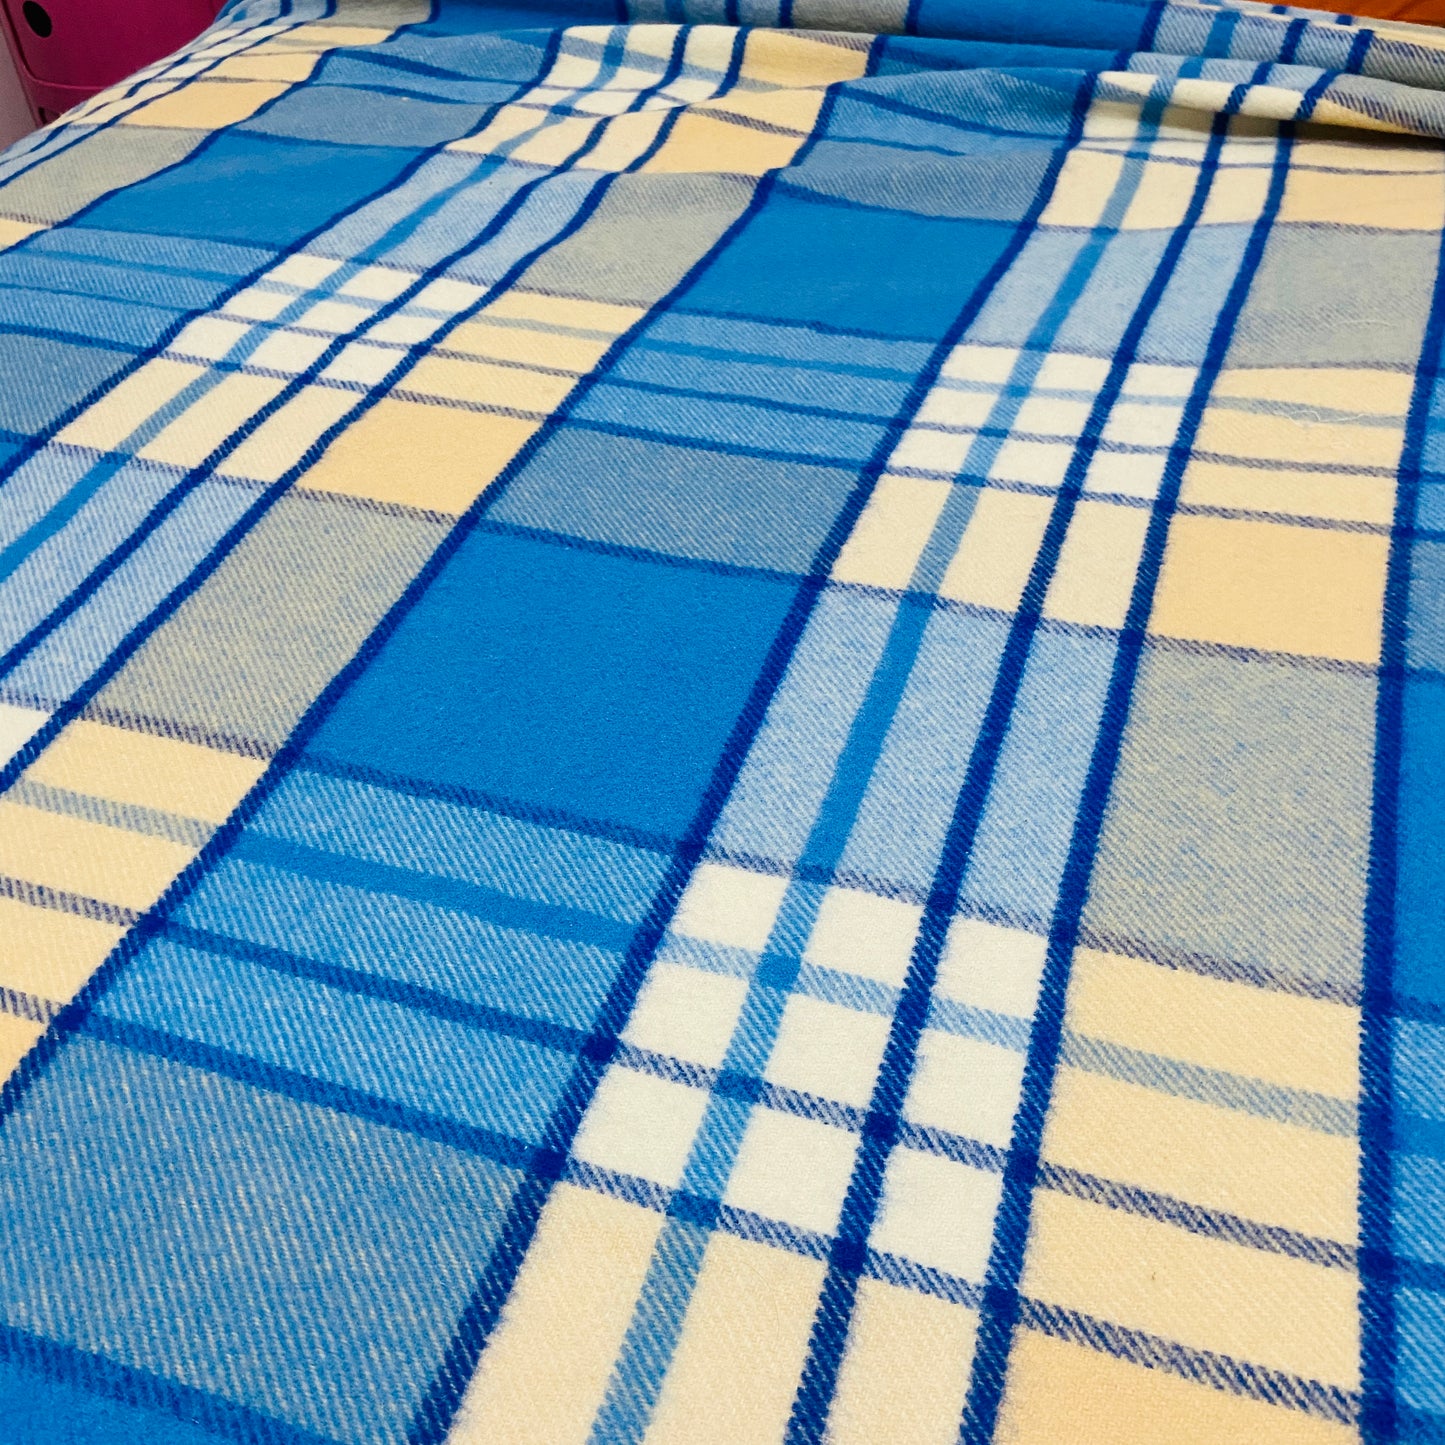 Royal Wool Warrnambool Blue Checked Vintage Blanket PERFECT Cond